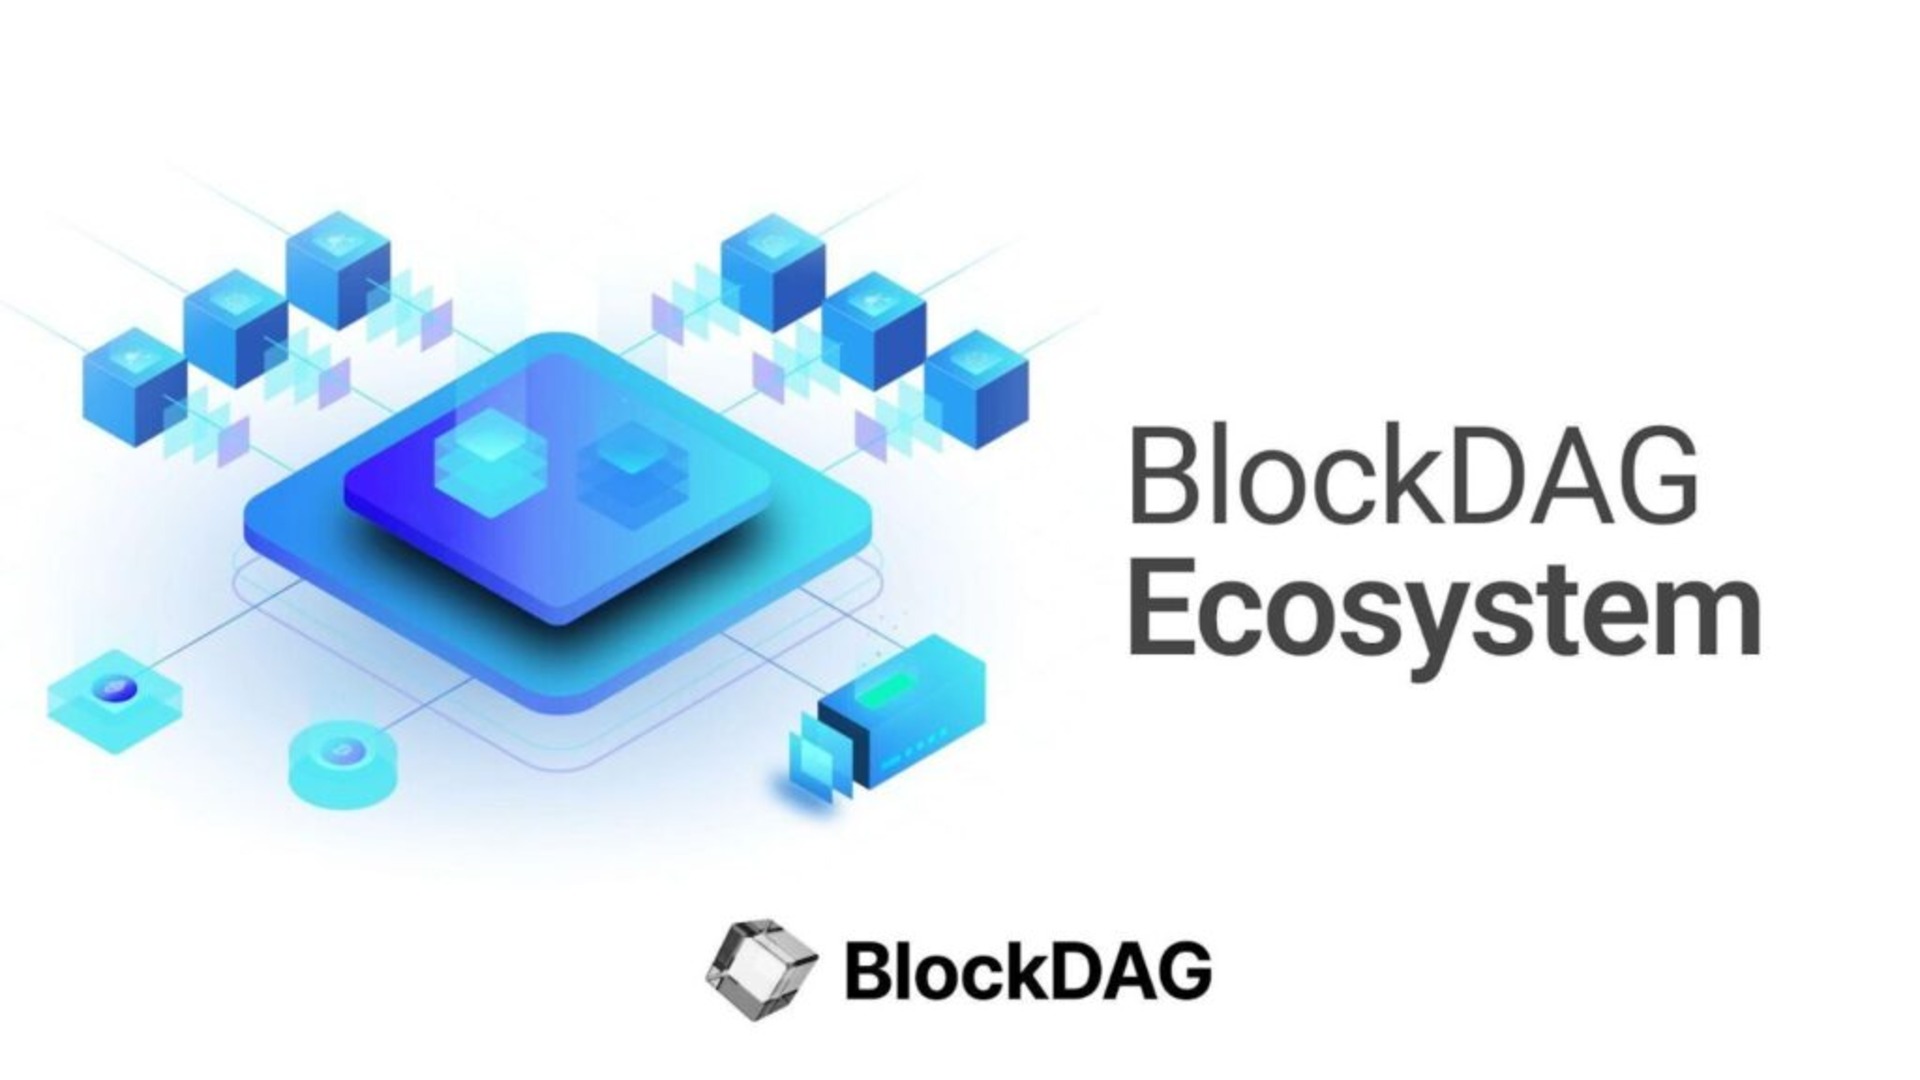 BlockDAG with $16.8 Million Presale is Surpassing XRP and LTC Coins’ Positions